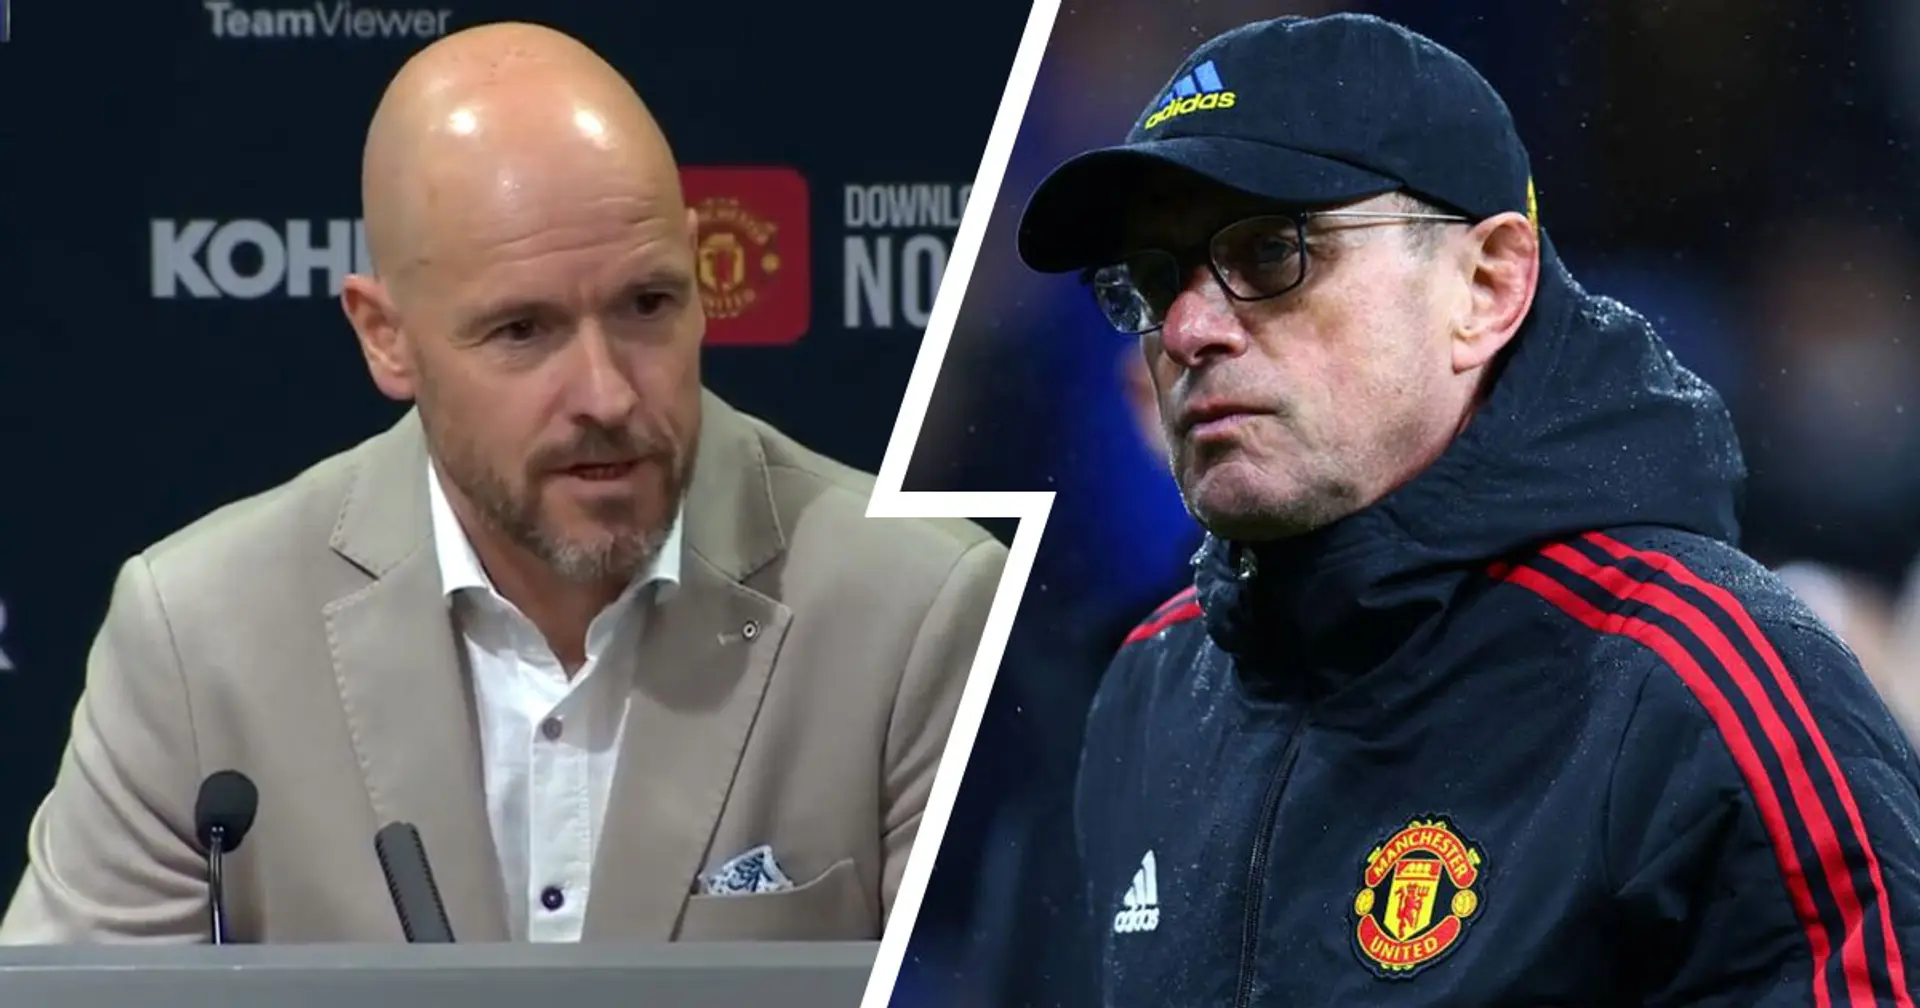 Ten Hag reveals stance on working with Rangnick - gives interesting verdict on his consultancy role